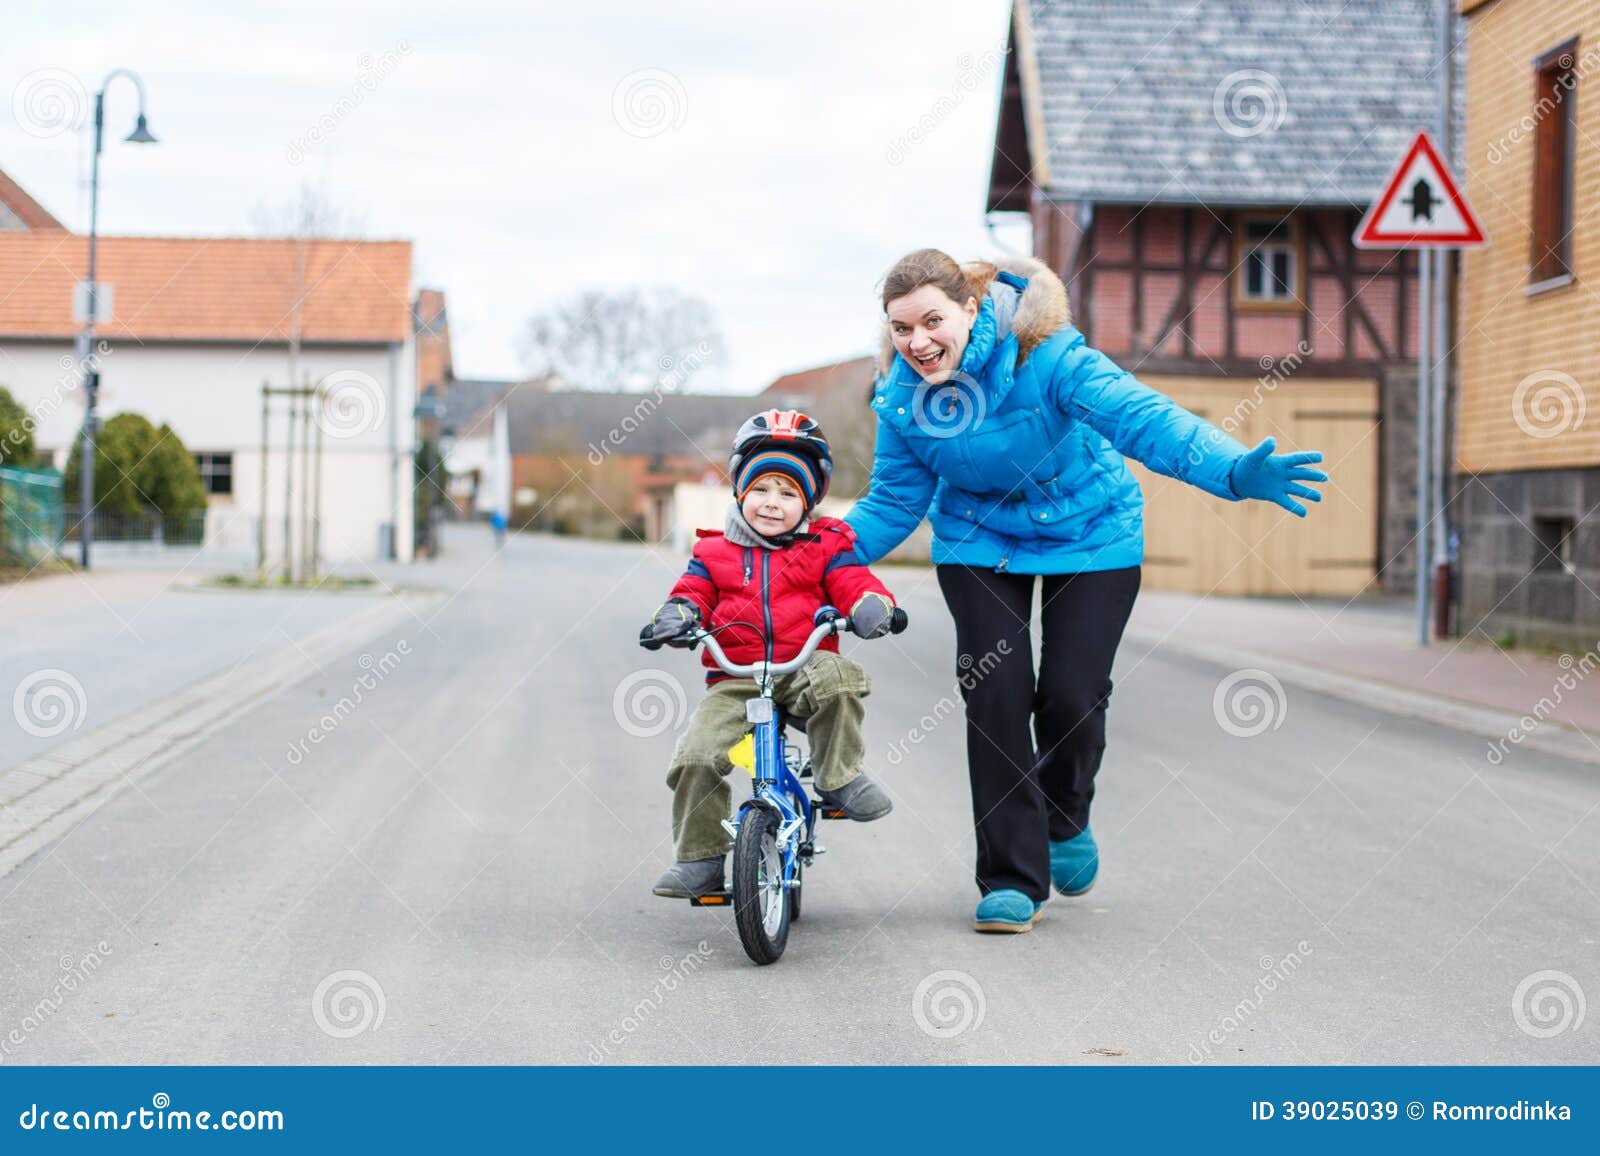 how to teach 3 year old to ride a bike